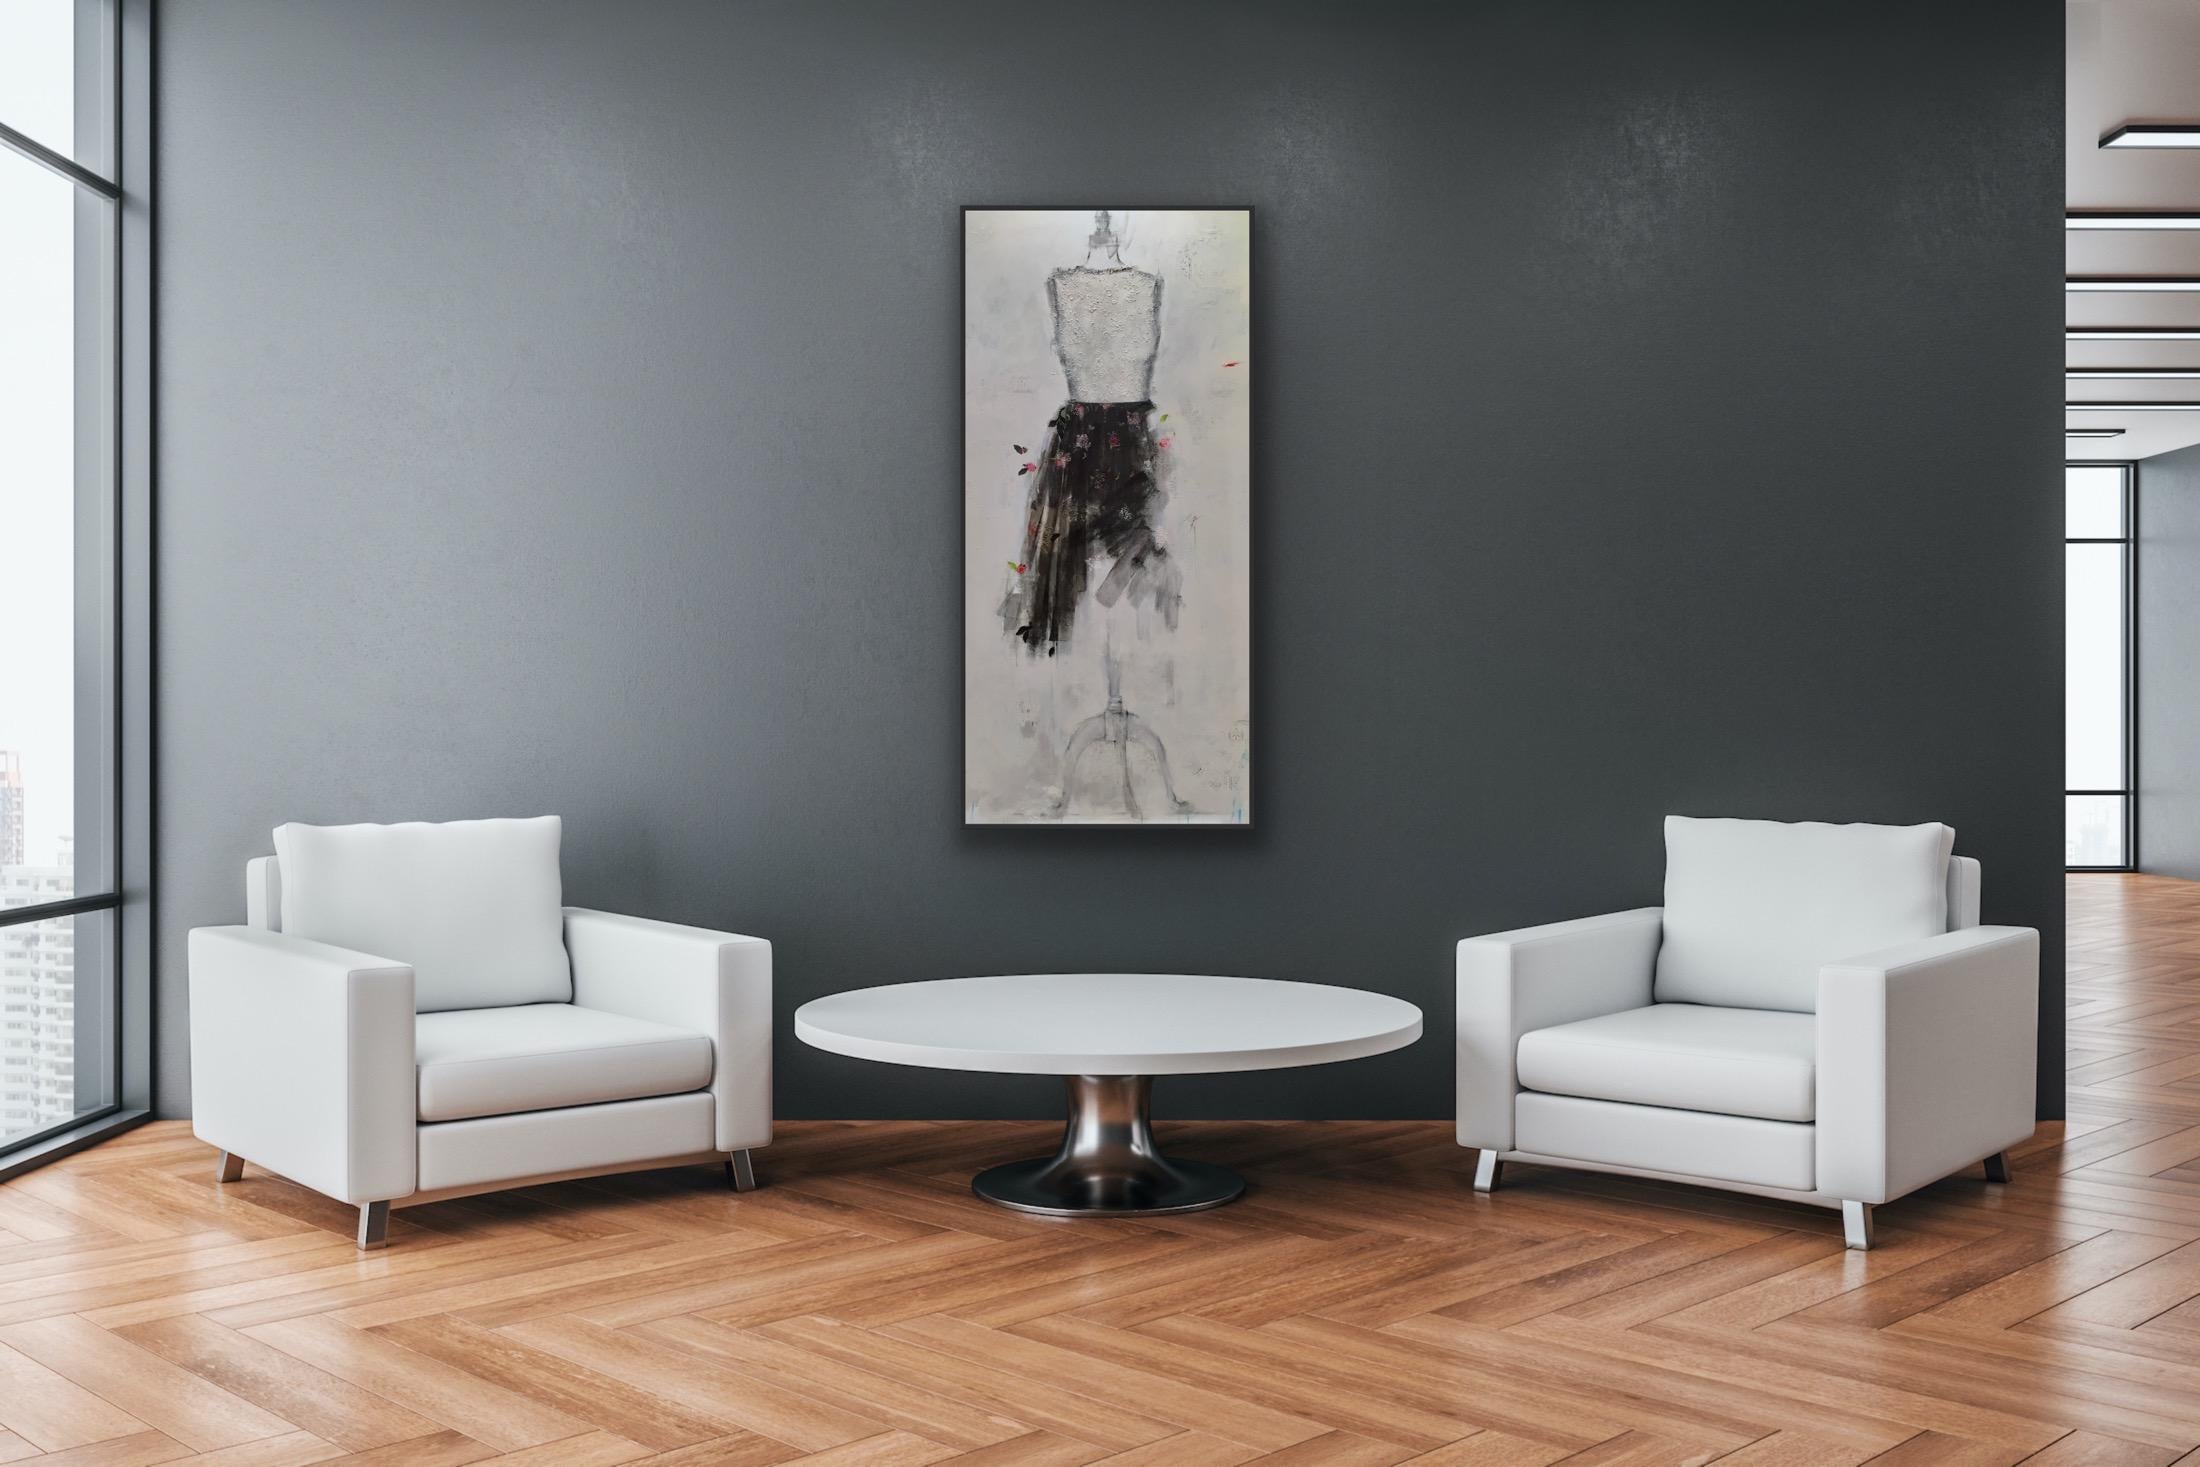 Chantilly Lace And A Pretty Place - 30”x60”, Black, Off White, Dress Painting For Sale 17